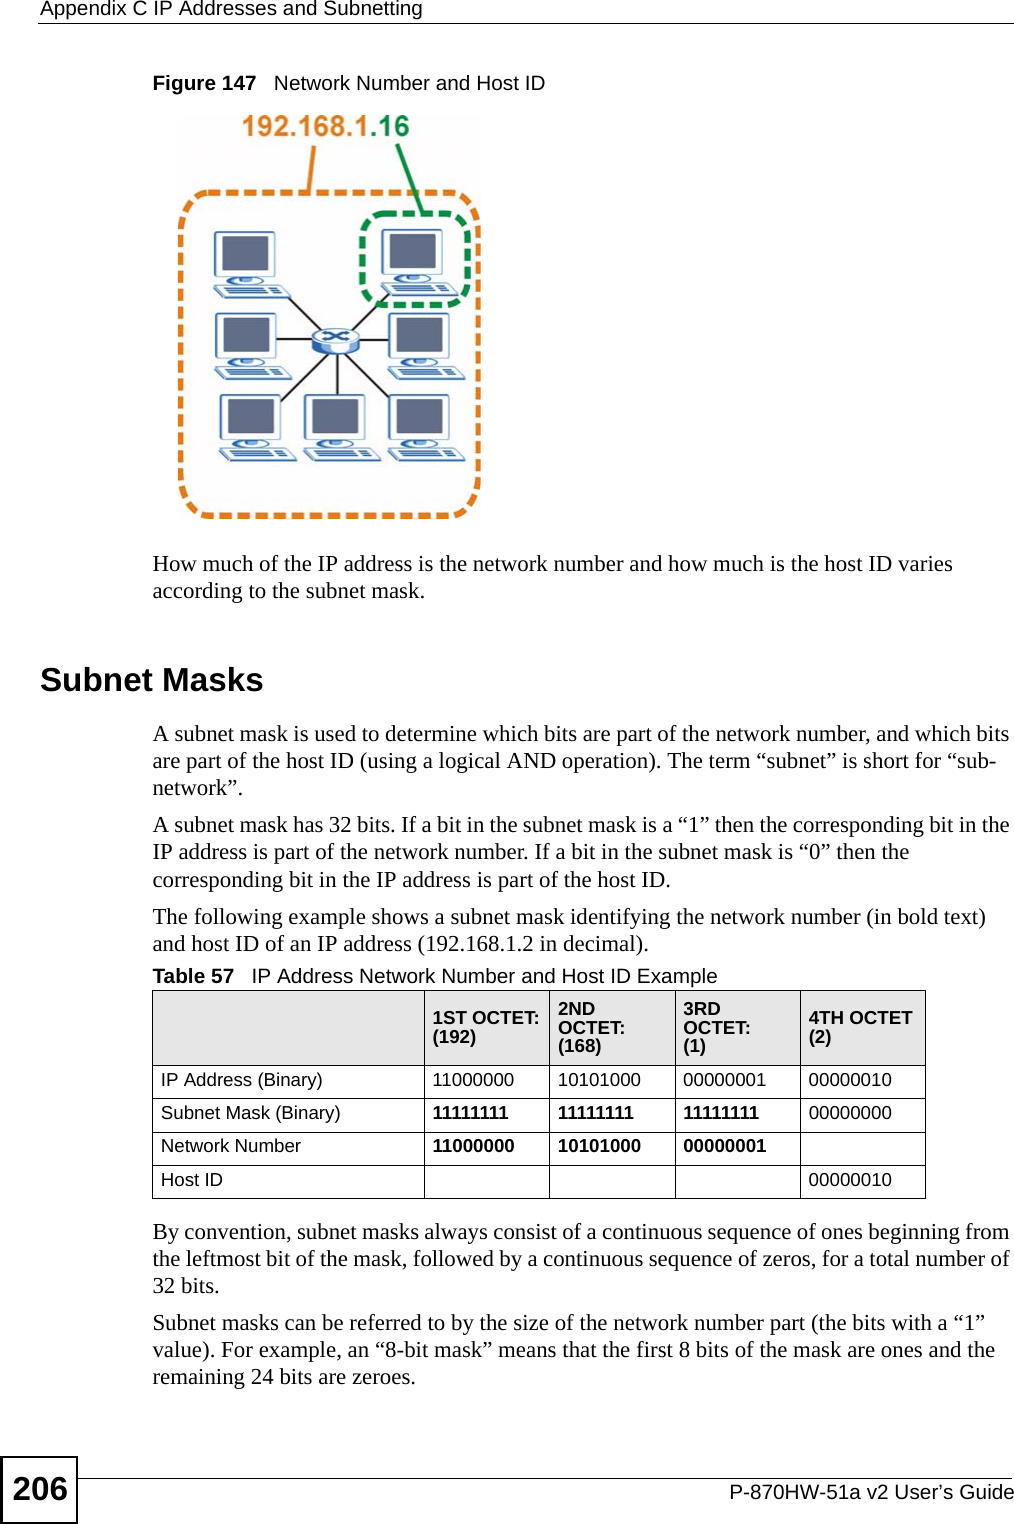 Appendix C IP Addresses and SubnettingP-870HW-51a v2 User’s Guide206Figure 147   Network Number and Host IDHow much of the IP address is the network number and how much is the host ID varies according to the subnet mask.  Subnet MasksA subnet mask is used to determine which bits are part of the network number, and which bits are part of the host ID (using a logical AND operation). The term “subnet” is short for “sub-network”.A subnet mask has 32 bits. If a bit in the subnet mask is a “1” then the corresponding bit in the IP address is part of the network number. If a bit in the subnet mask is “0” then the corresponding bit in the IP address is part of the host ID. The following example shows a subnet mask identifying the network number (in bold text) and host ID of an IP address (192.168.1.2 in decimal).By convention, subnet masks always consist of a continuous sequence of ones beginning from the leftmost bit of the mask, followed by a continuous sequence of zeros, for a total number of 32 bits.Subnet masks can be referred to by the size of the network number part (the bits with a “1” value). For example, an “8-bit mask” means that the first 8 bits of the mask are ones and the remaining 24 bits are zeroes.Table 57   IP Address Network Number and Host ID Example1ST OCTET:(192)2ND OCTET:(168)3RD OCTET:(1)4TH OCTET(2)IP Address (Binary) 11000000 10101000 00000001 00000010Subnet Mask (Binary) 11111111 11111111 11111111 00000000Network Number 11000000 10101000 00000001Host ID 00000010